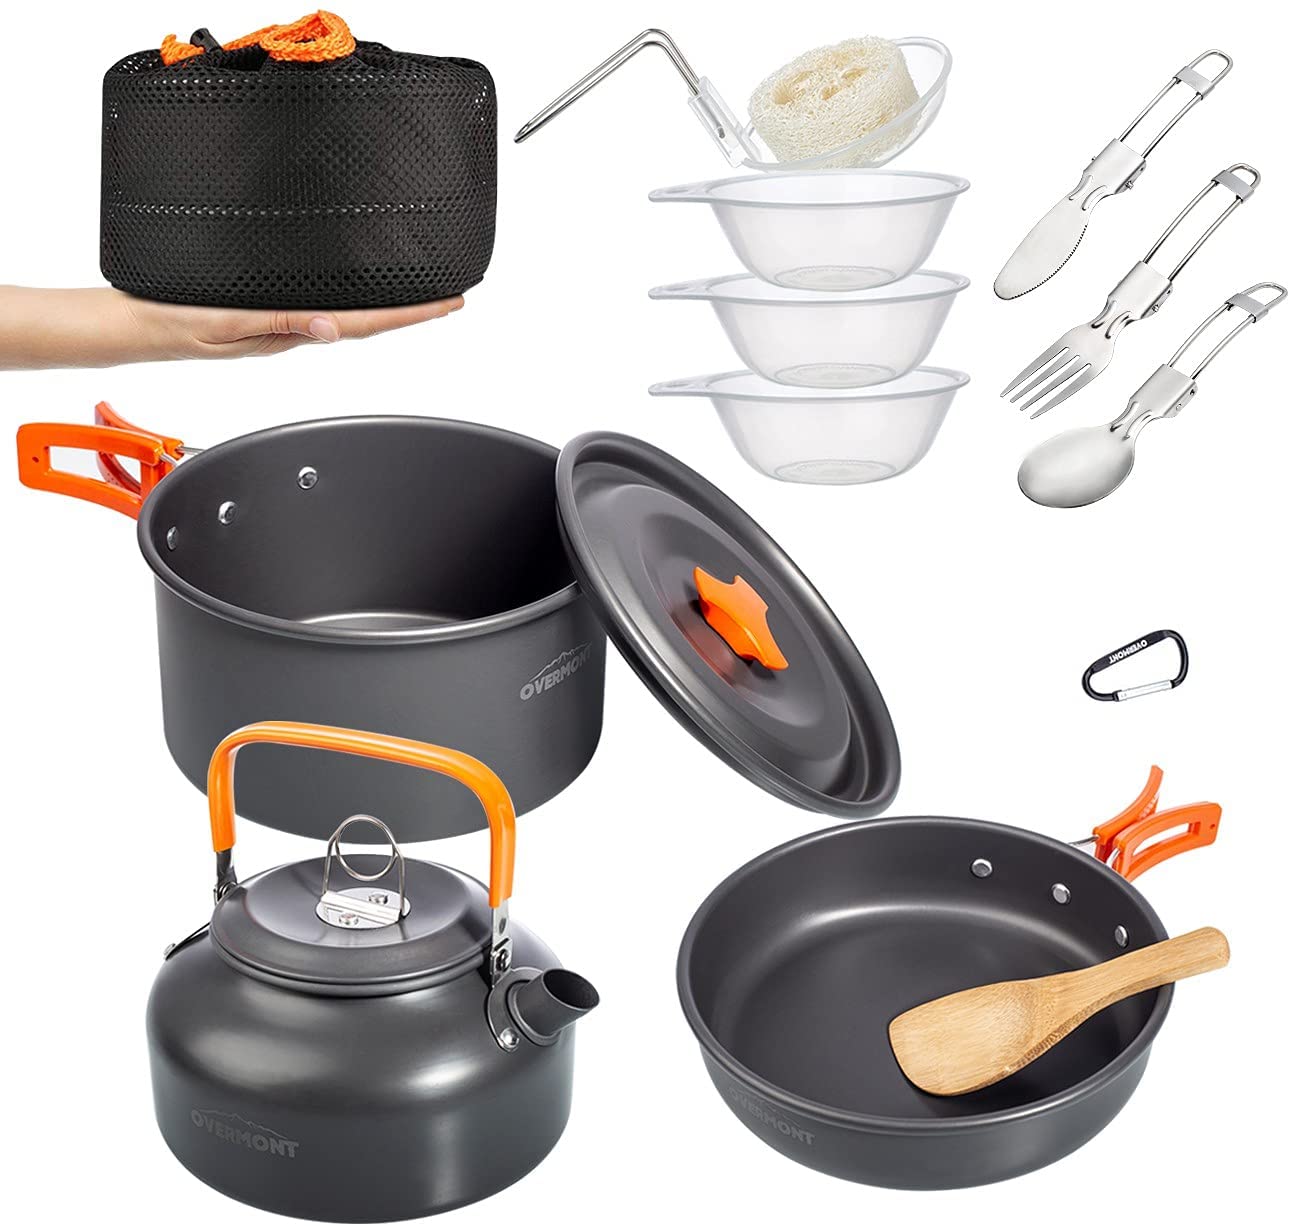 How to buy outdoor stoves and cookwares